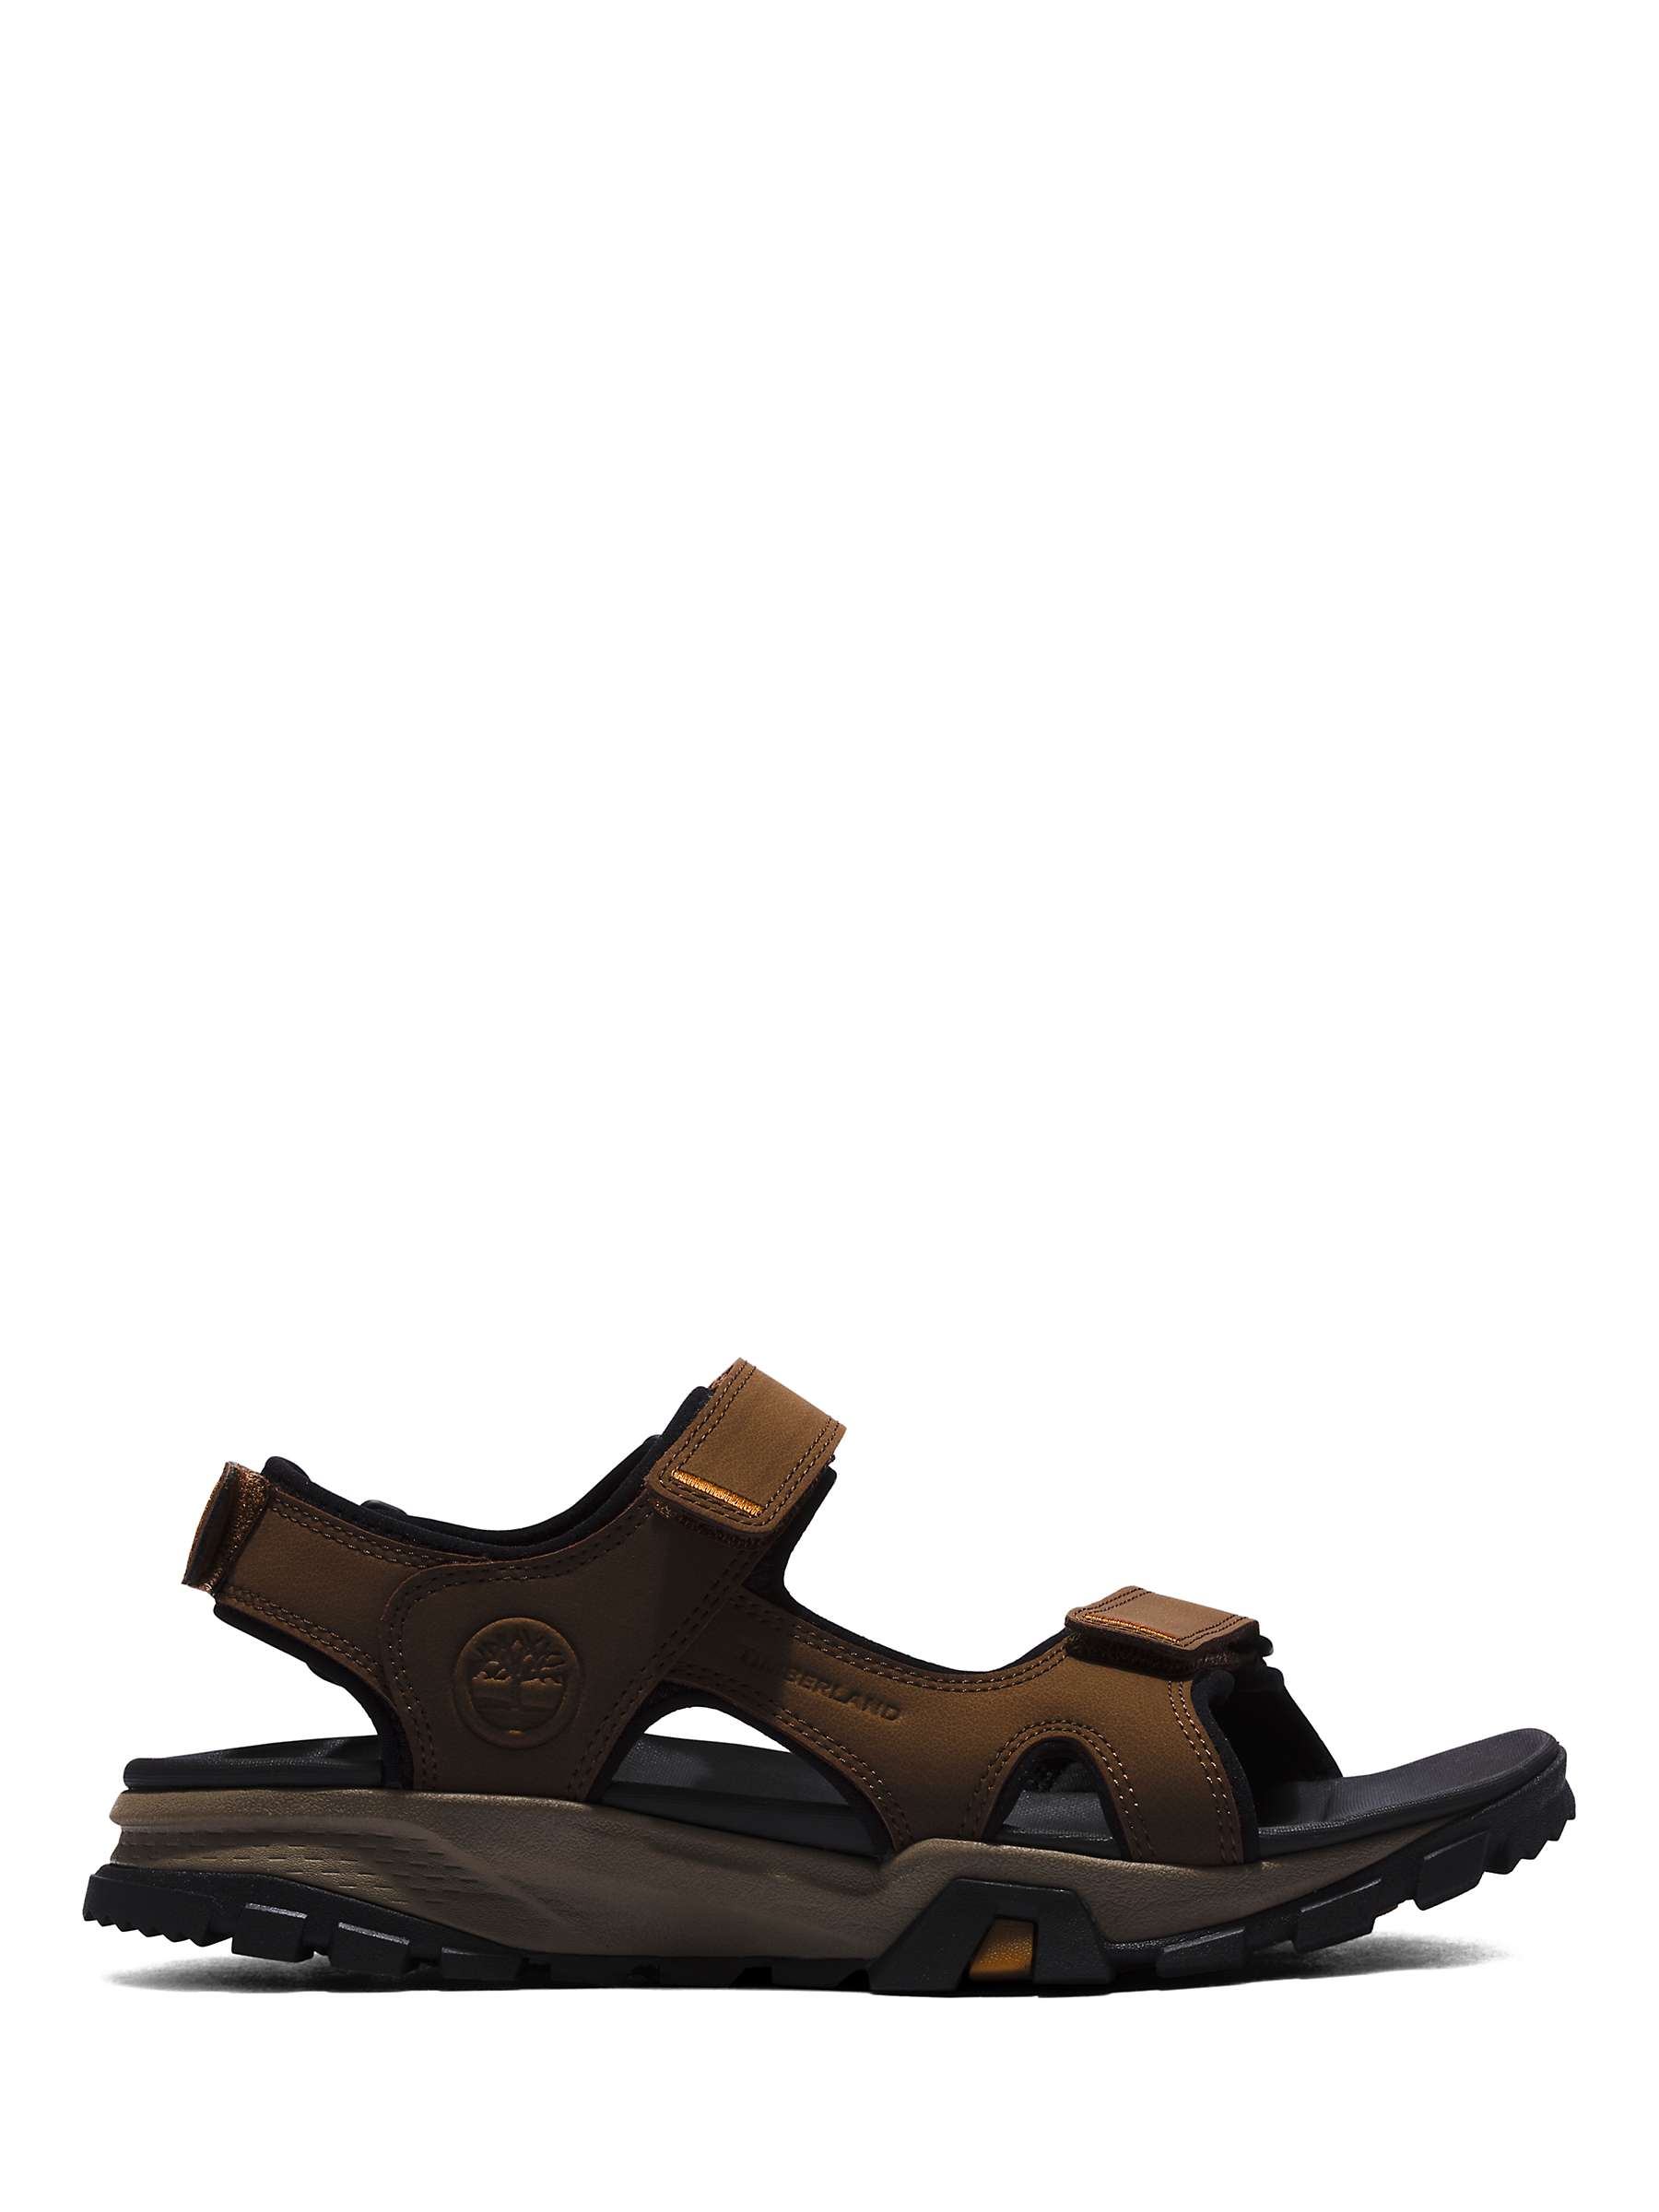 Timberland Lincoln Peak Leather Sandals, Brown at John Lewis & Partners